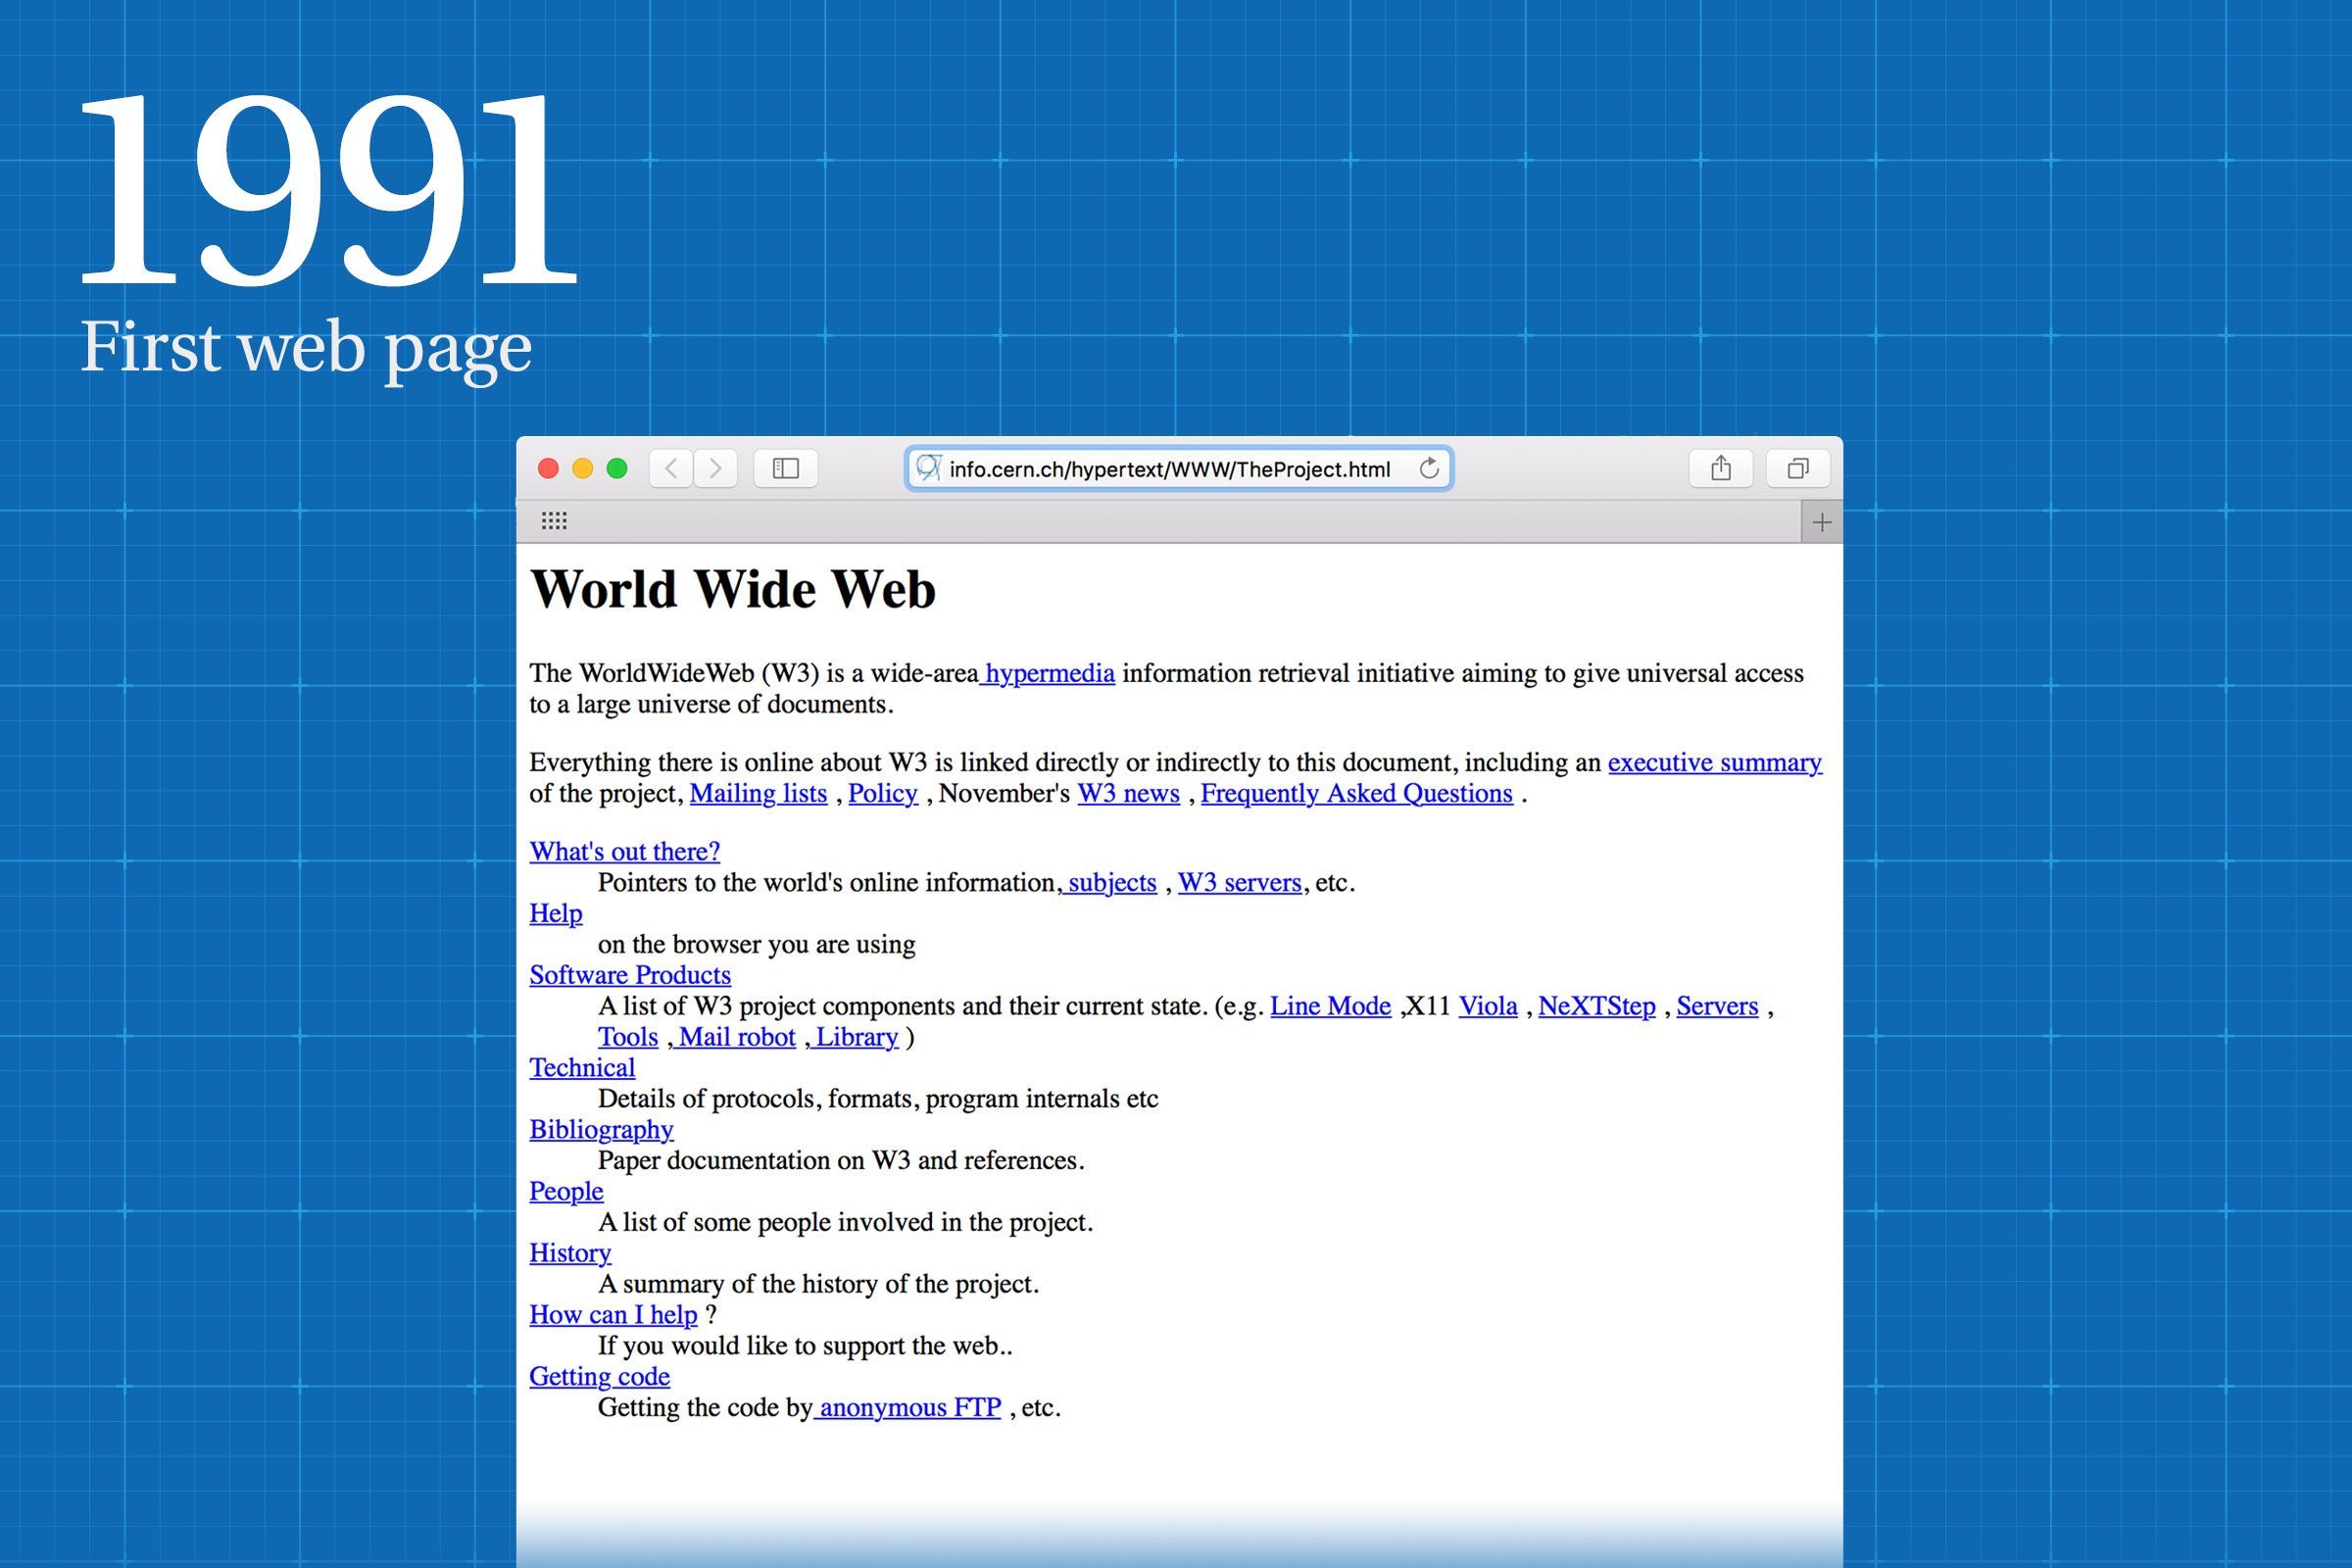 1991: The first web page